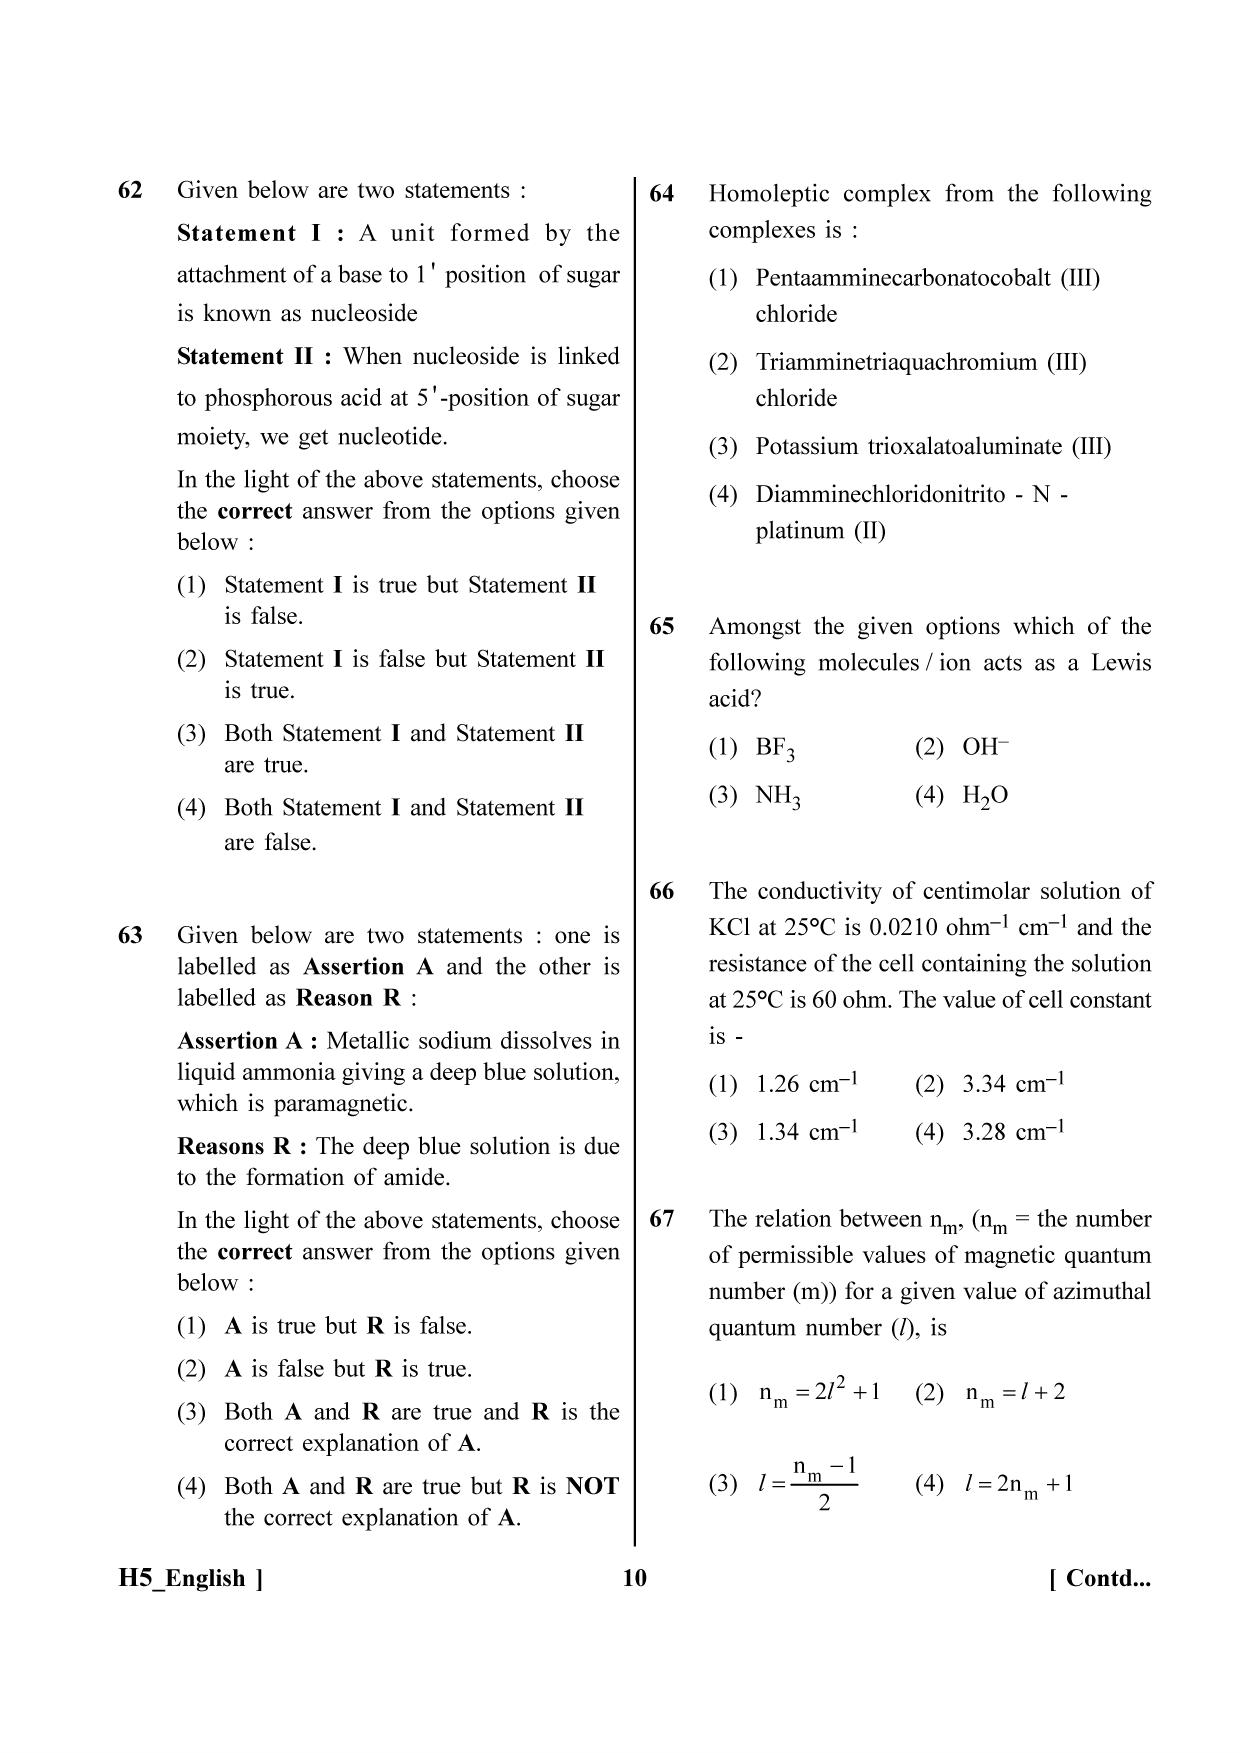 NEET 2023 H5 Question Paper - Page 10